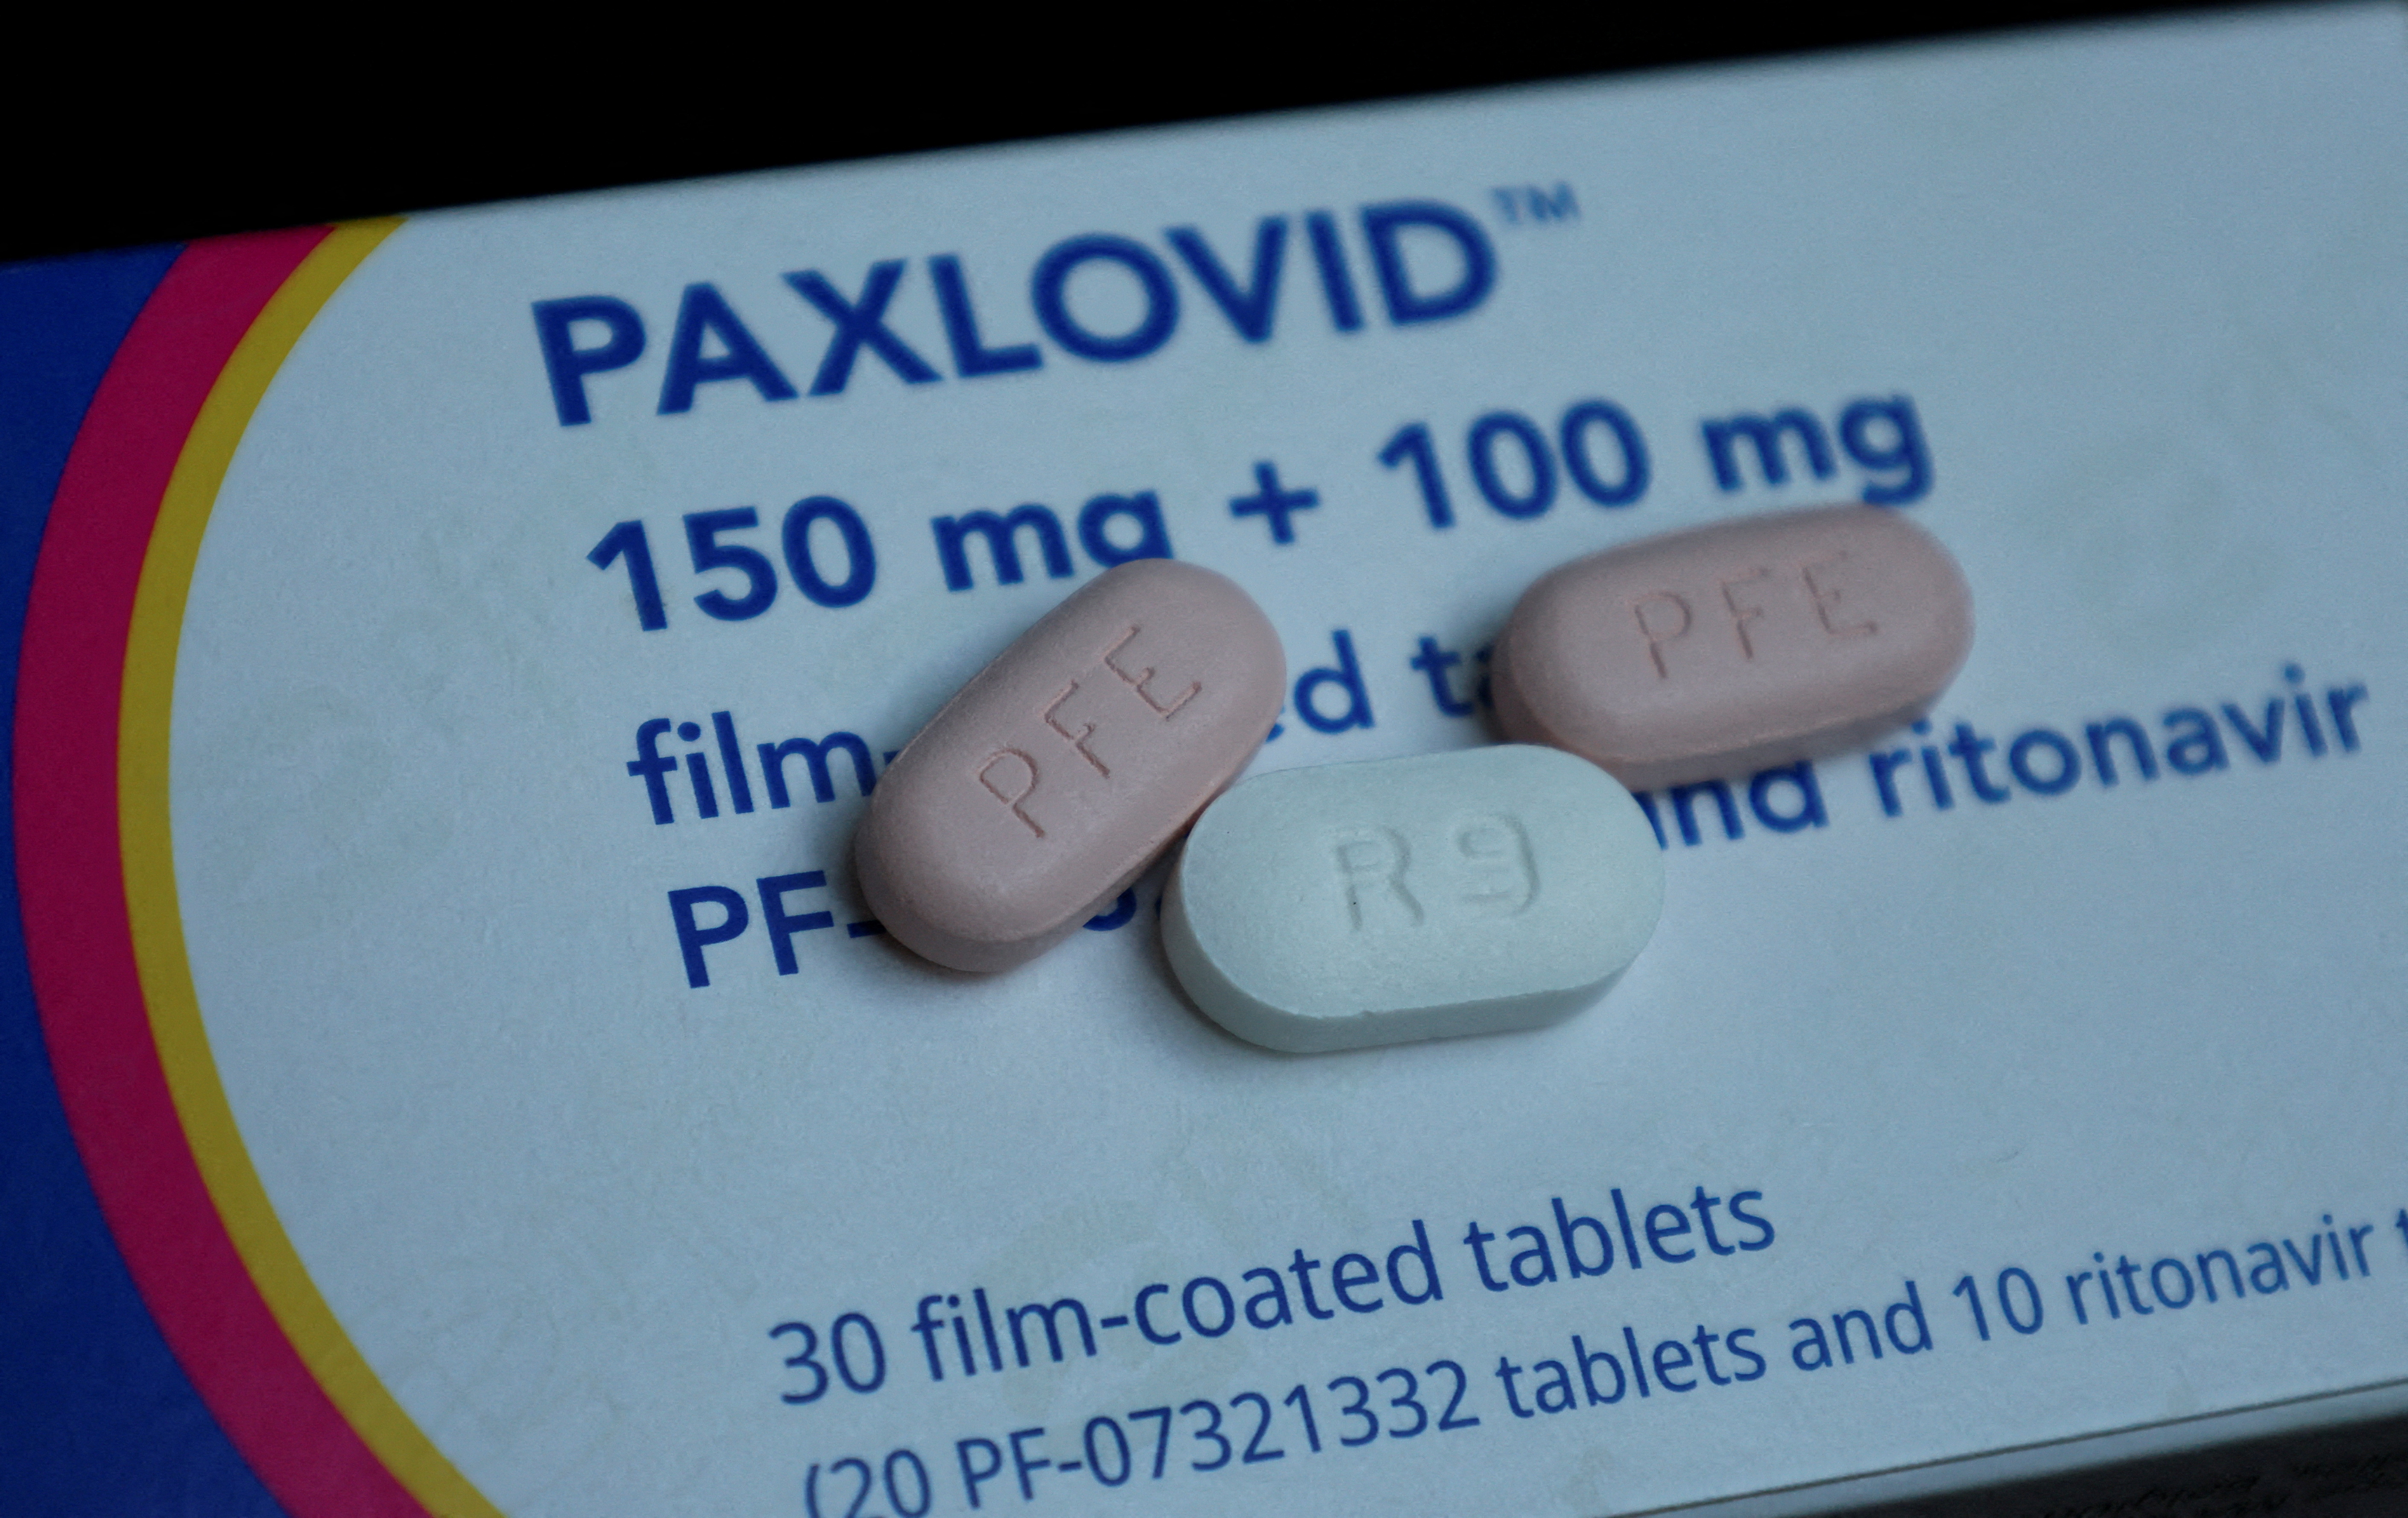 Paxlovid is shown in this picture illustration